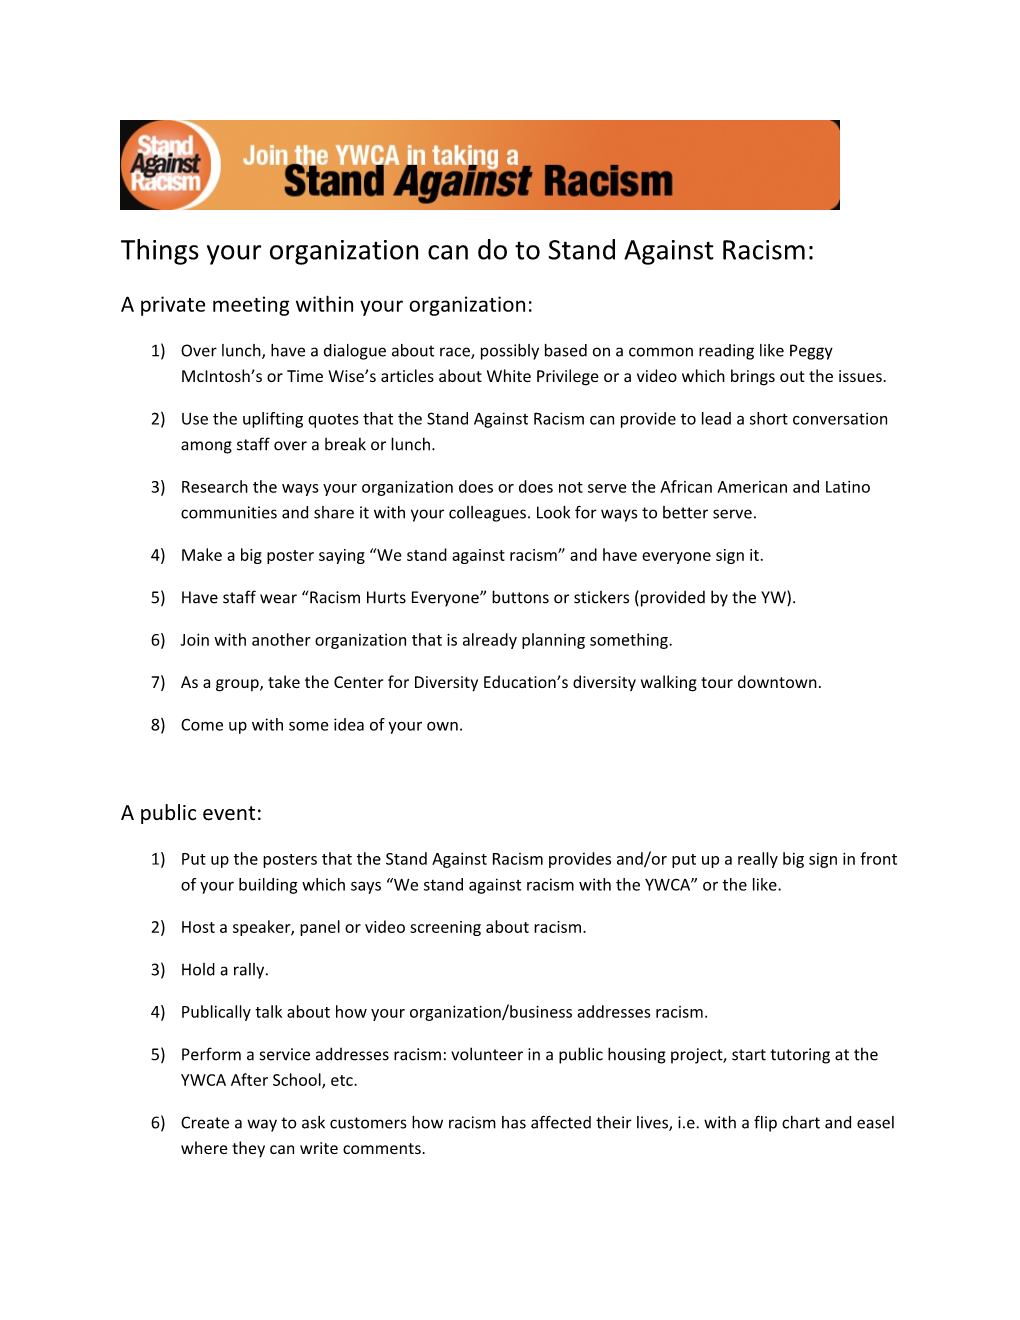 Things Your Organization Can Do to Stand Against Racism